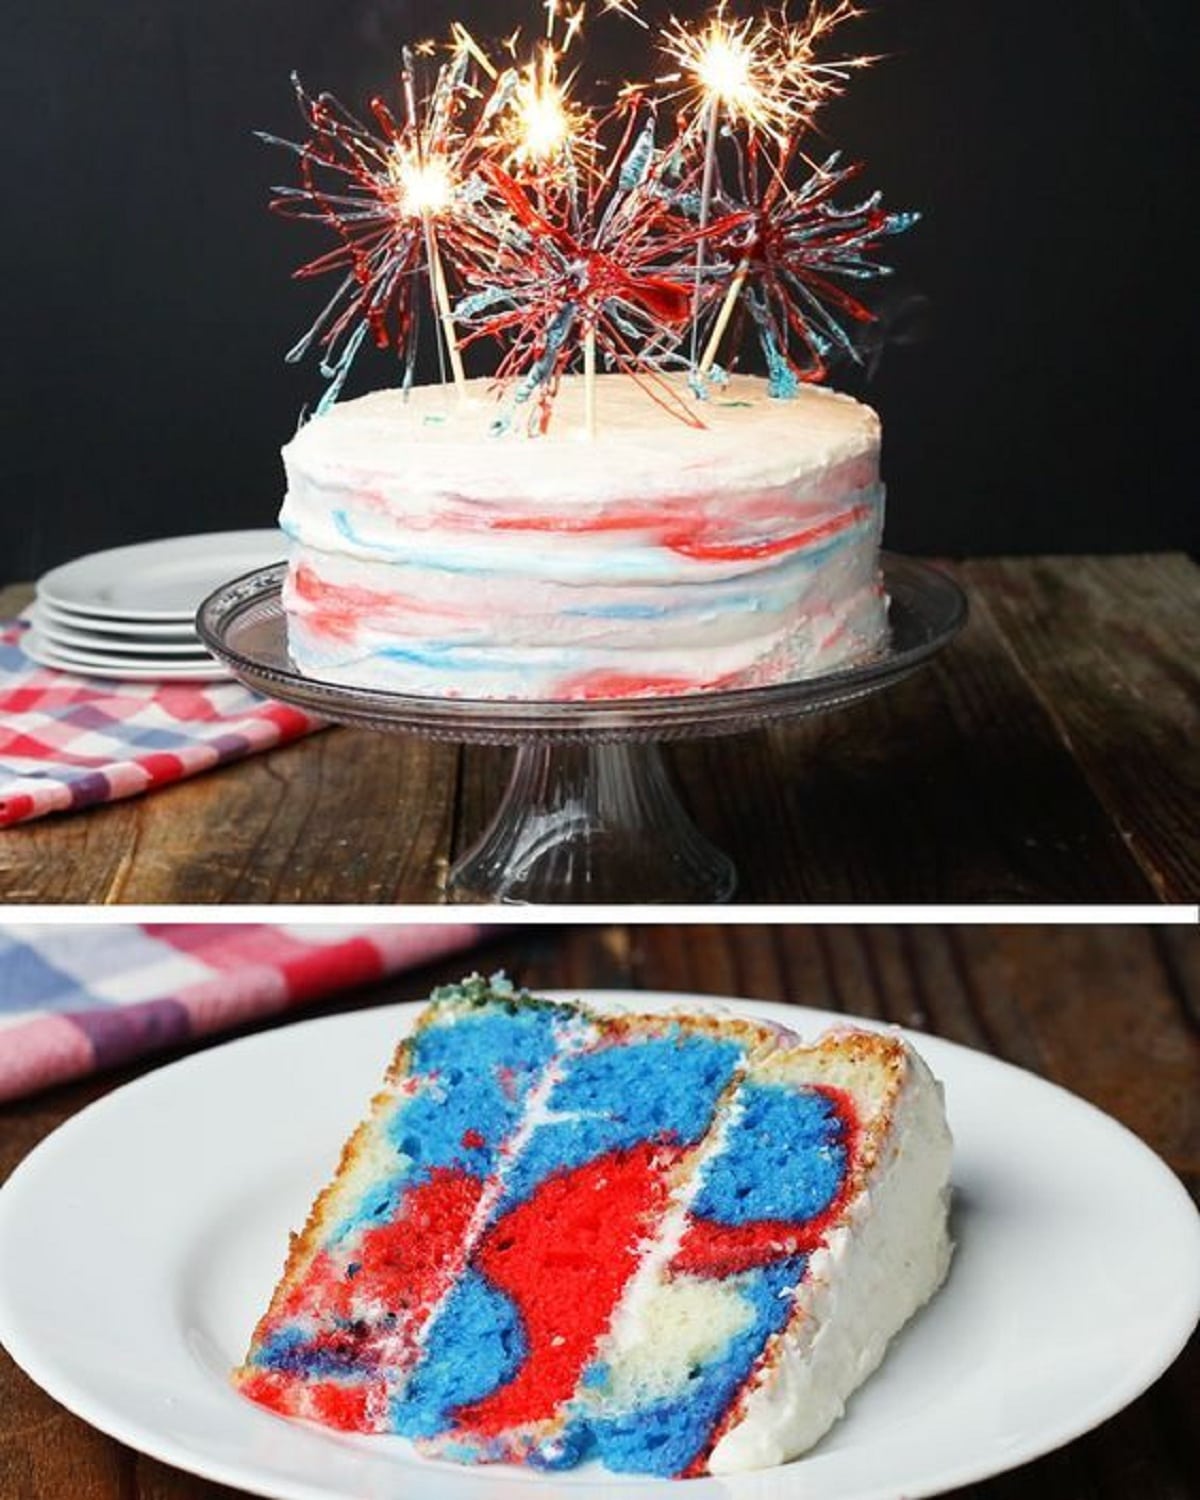 White layer cake collage showing slice with red and blue swirls